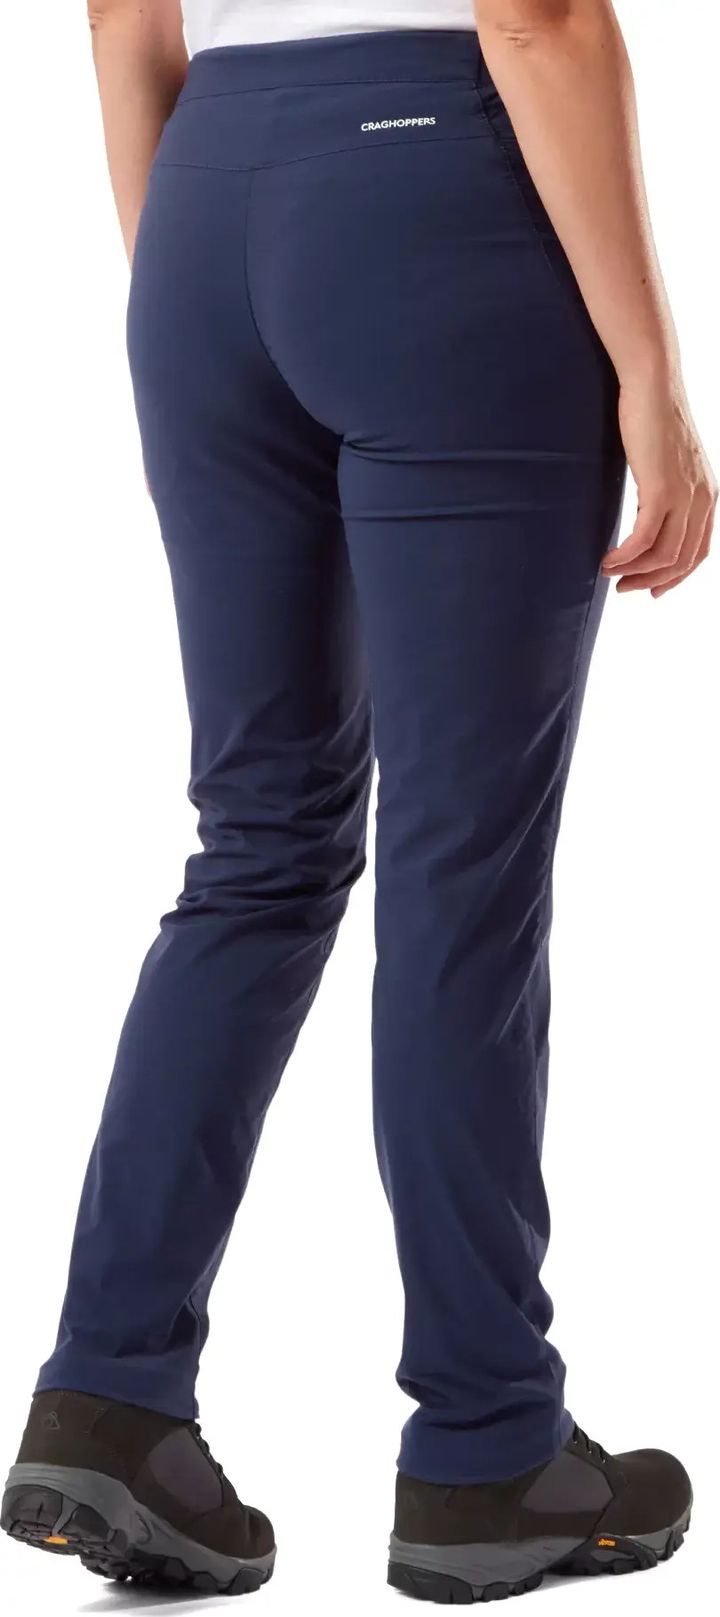 Women's Nosilife Pro Active Trousers Regular Blue Navy Craghoppers